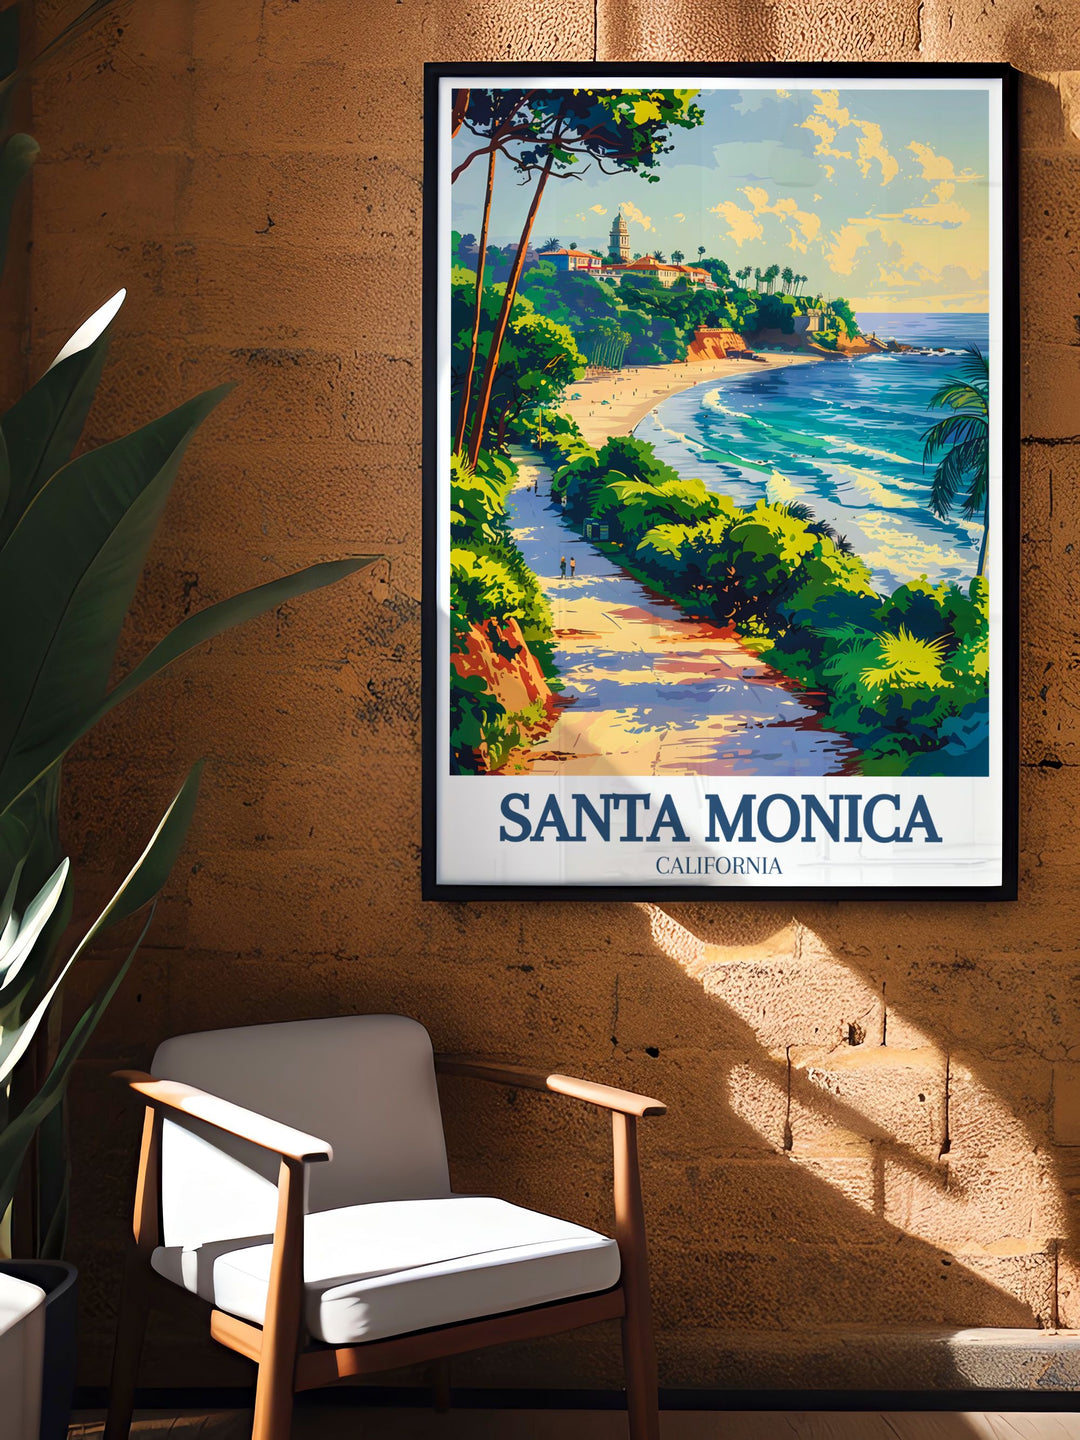 A vibrant travel print featuring Palisades Park, emphasizing its lush gardens, scenic pathways, and peaceful ambiance. The colorful illustration celebrates the parks natural beauty and historical relevance.